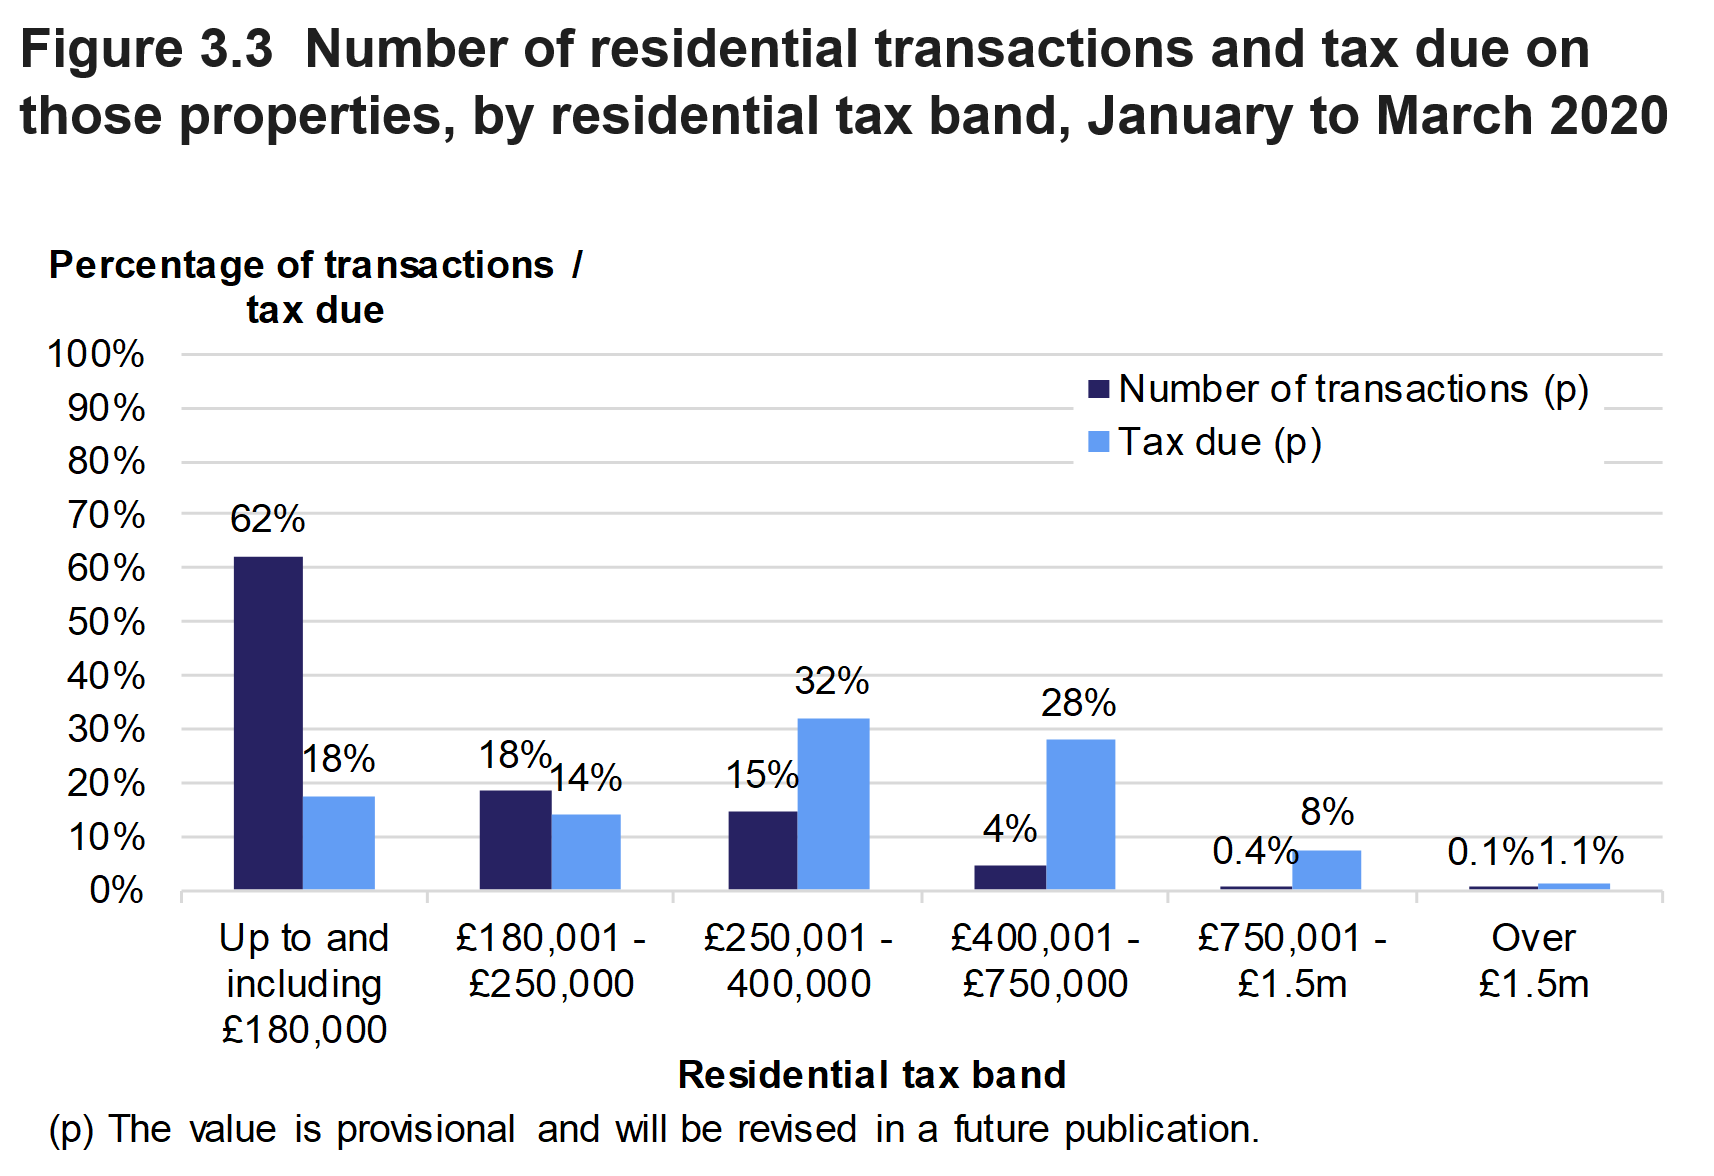 Figure 3.3 shows the number of residential transactions and amount of tax due, by residential tax band. Data is presented as the percentage of transactions or tax due and relates to transactions effective in January to March 2020.